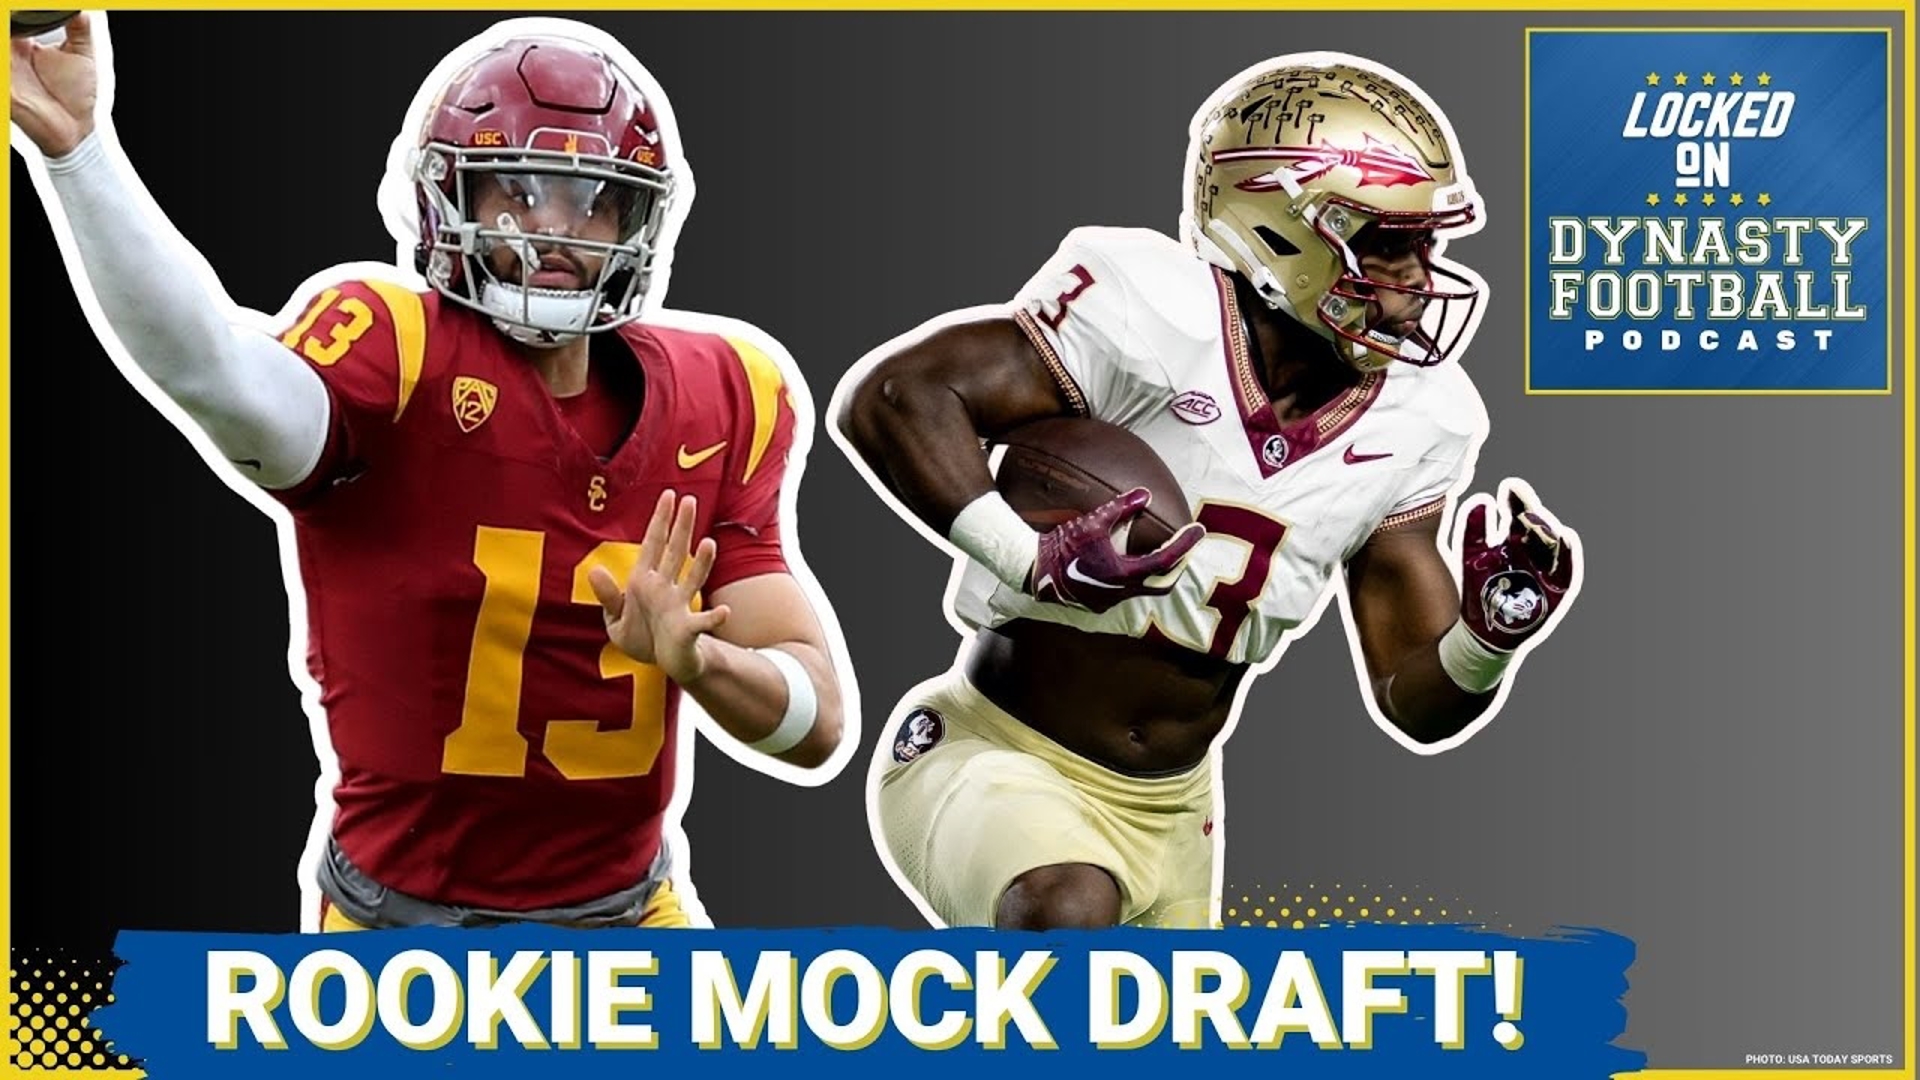 The NFL Draft is just hours away but who will go No. 1 in superflex rookie drafts? And when will the first running back come off the board?